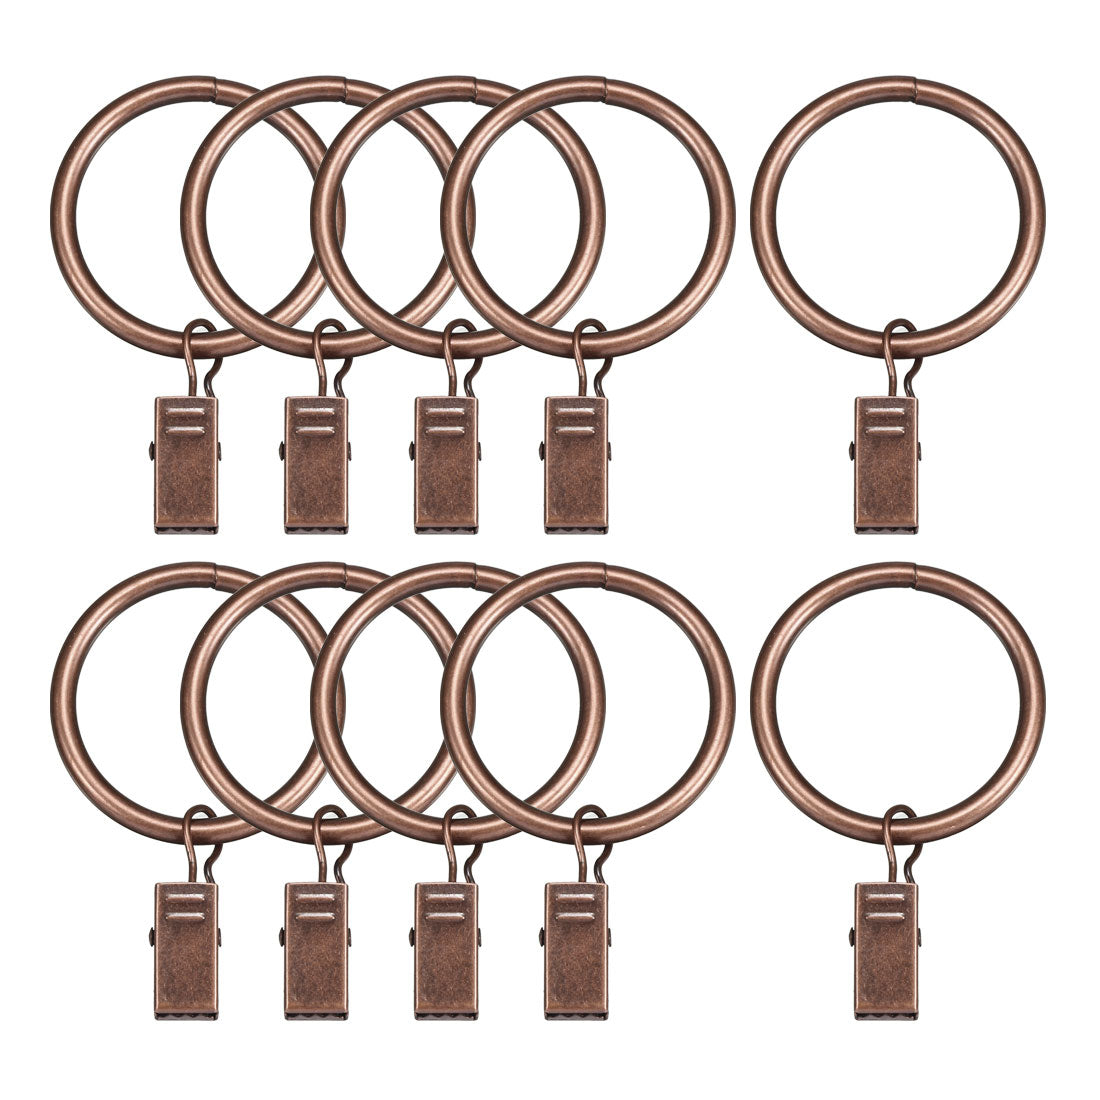 uxcell Uxcell Curtain Rings with Clips Strong Decorative Metal Drapery Shower Rustproof 0.98" Interior Diameter Copper Tone 10pcs